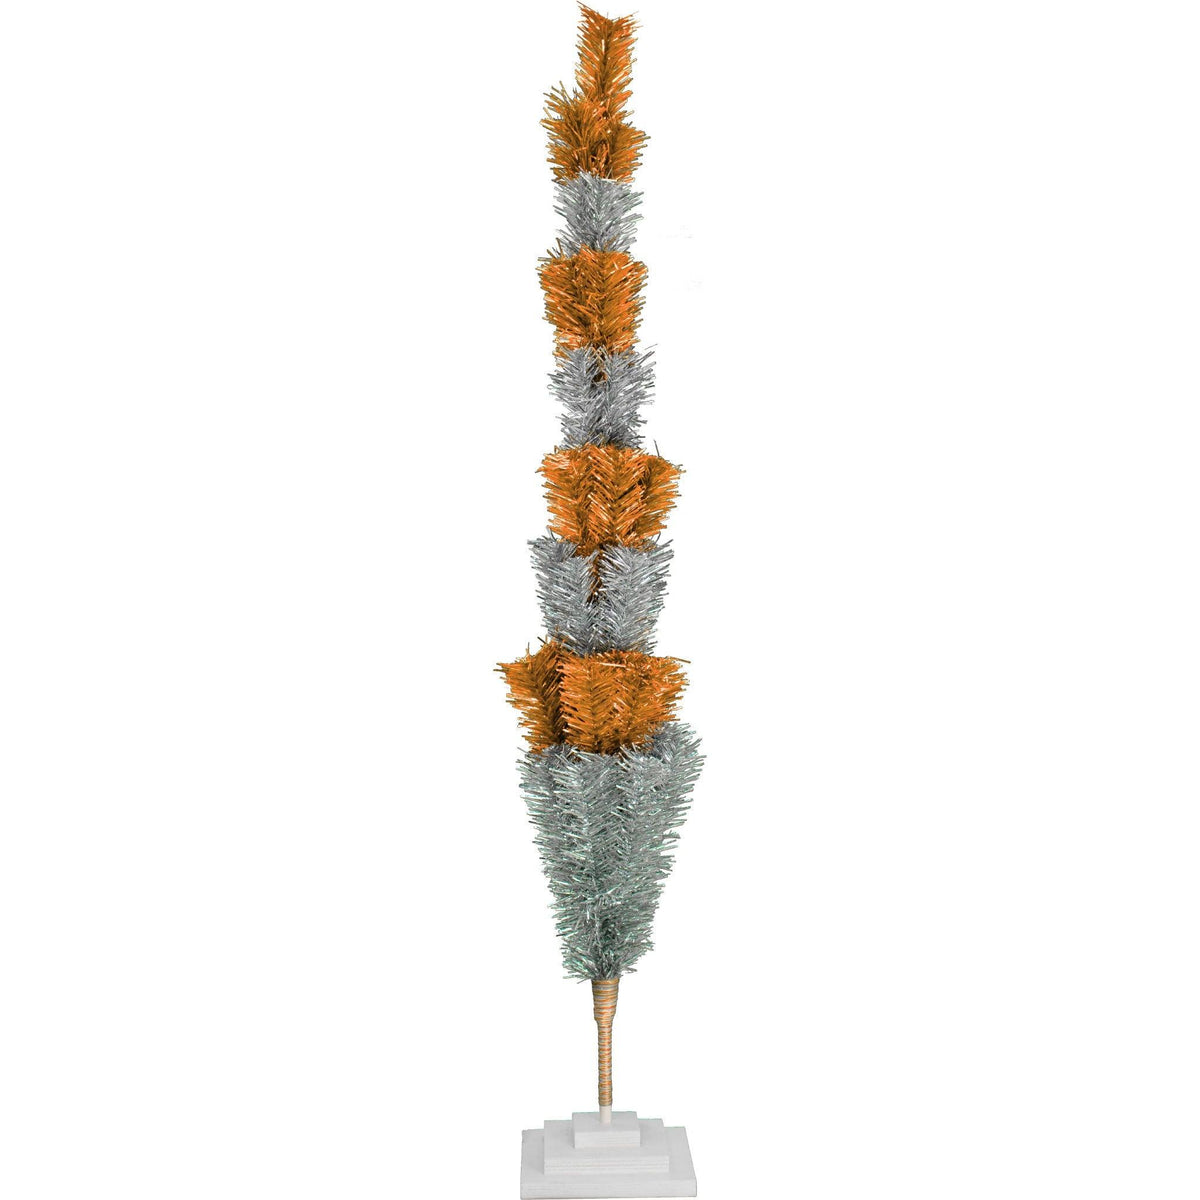 48in Tall Orange & Silver Layered Tinsel Christmas Trees! Decorate for the holidays with a Shiny Orange and Metallic Silver retro-style Christmas Tree. On sale now at leedisplay.com